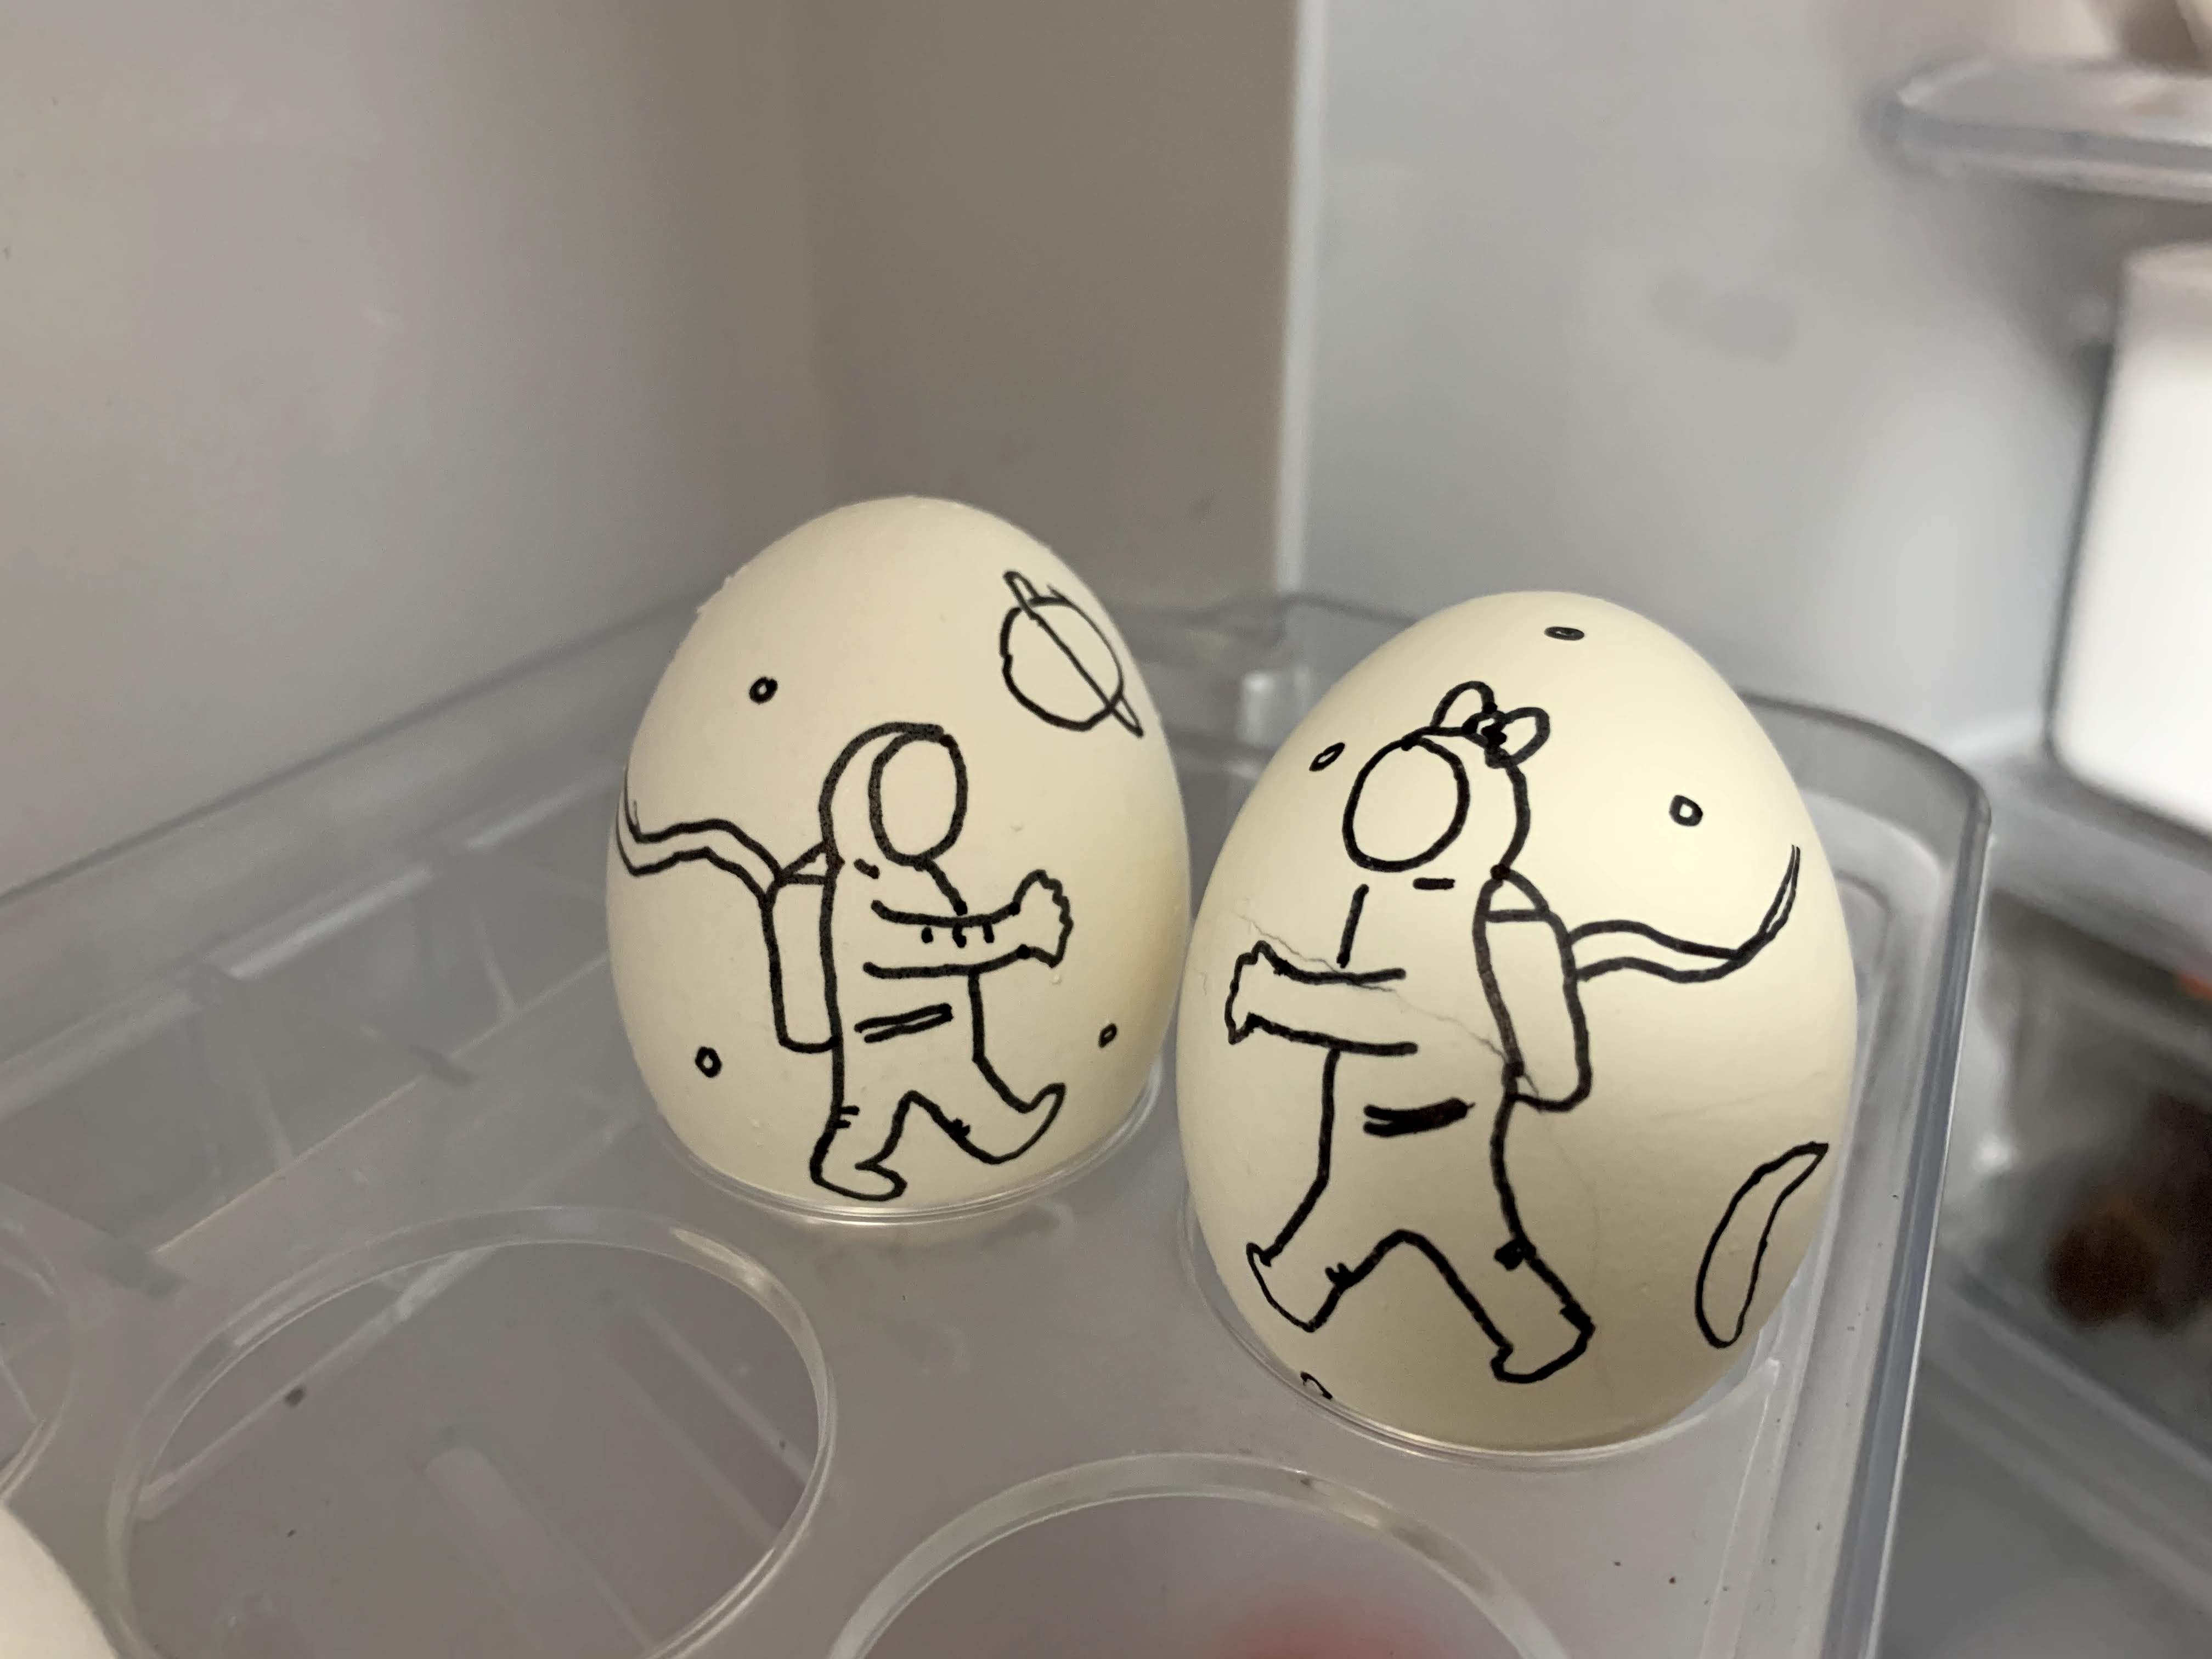 two boiled eggs with a picture of a boy and a girl astronaut